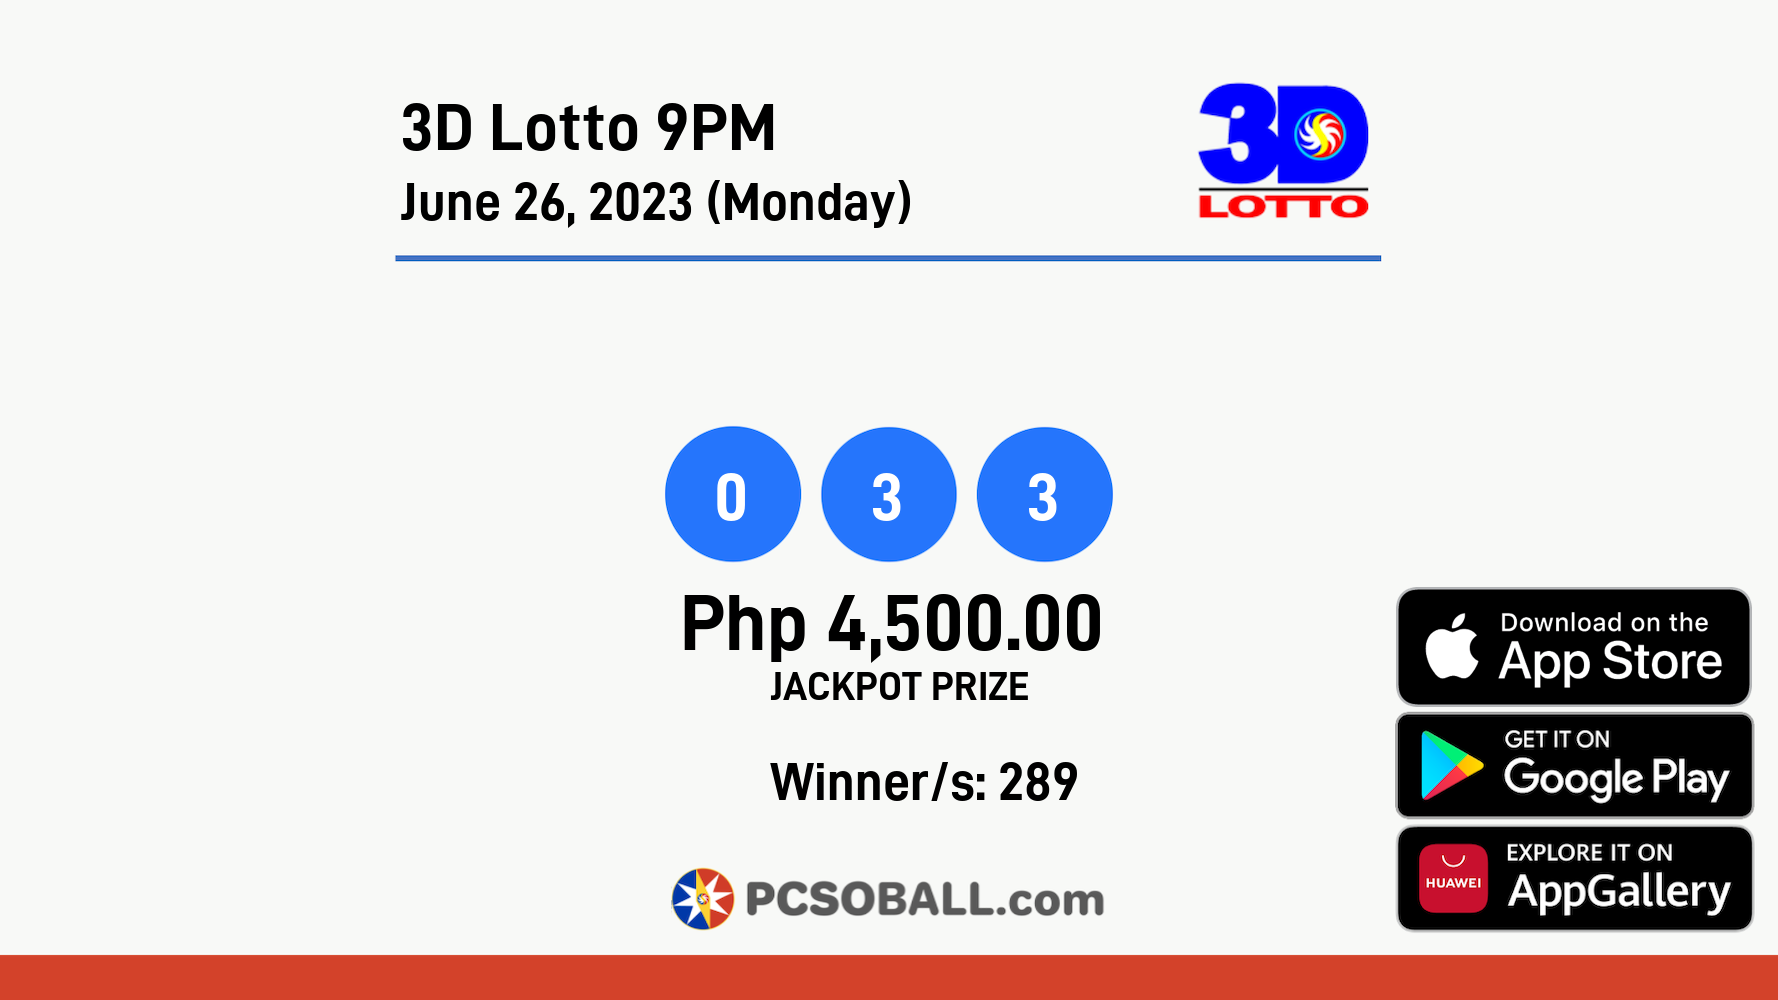 3D Lotto 9PM June 26, 2023 (Monday) Result